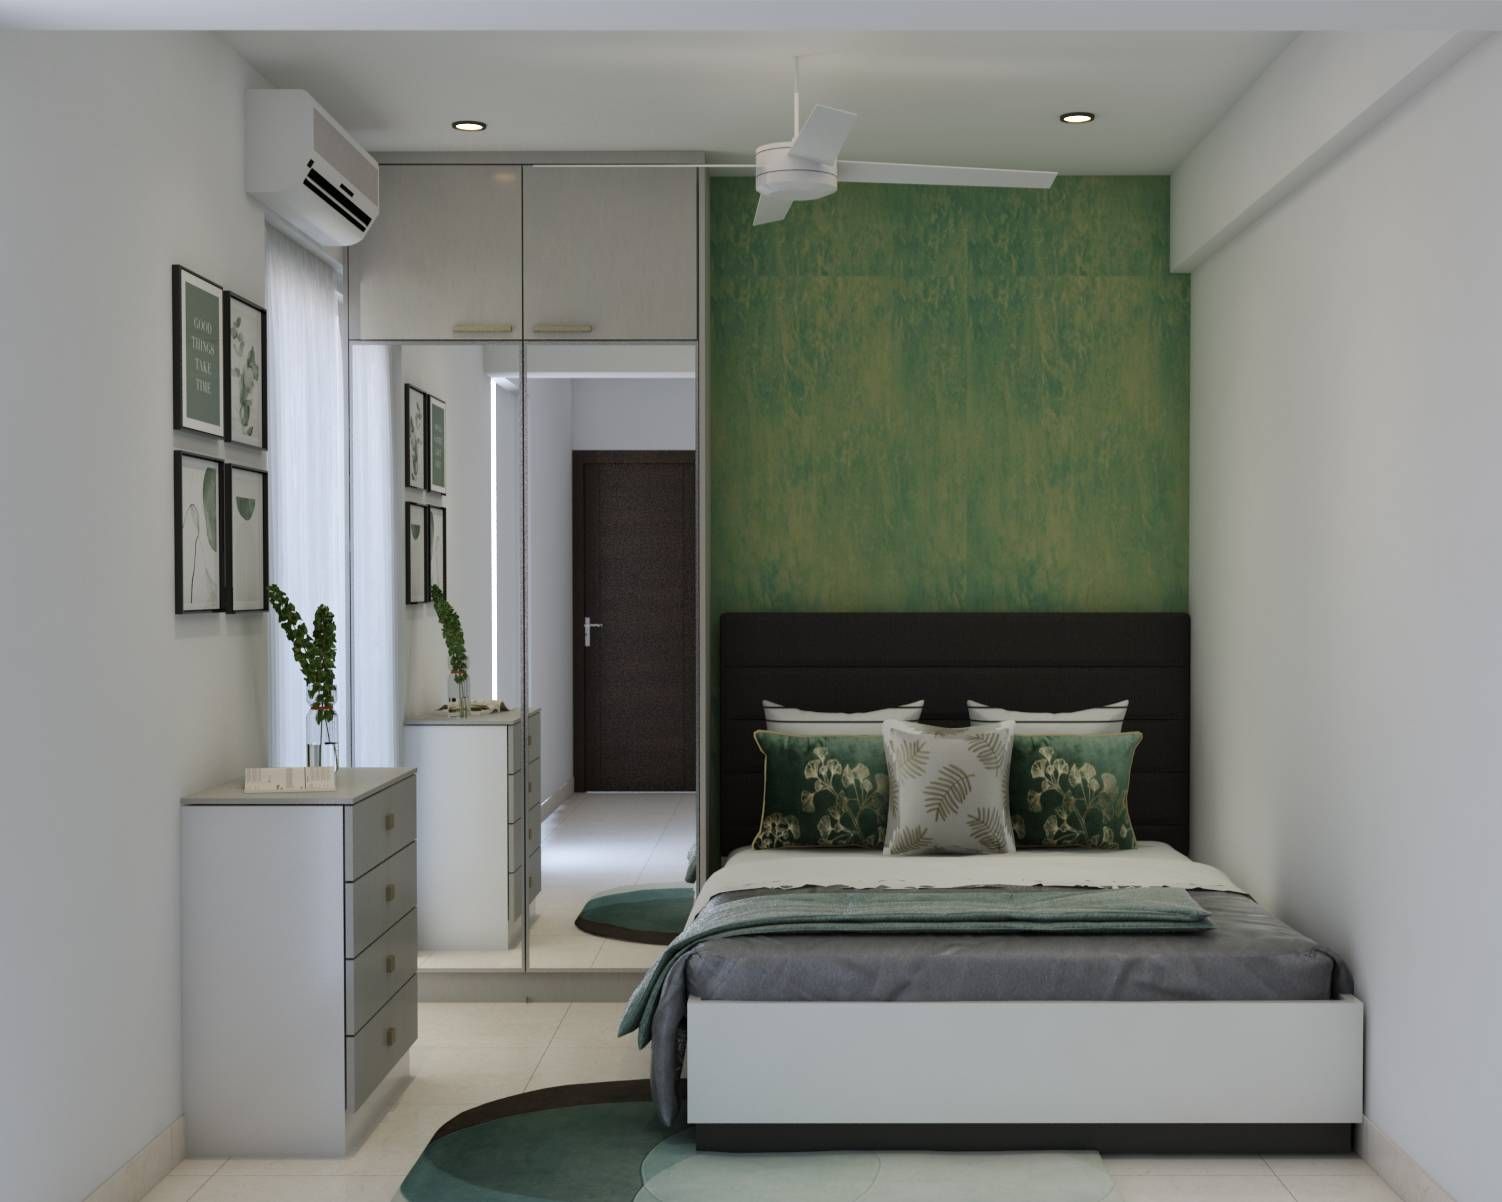 Contemporary Master Bedroom Design With Green Interiors